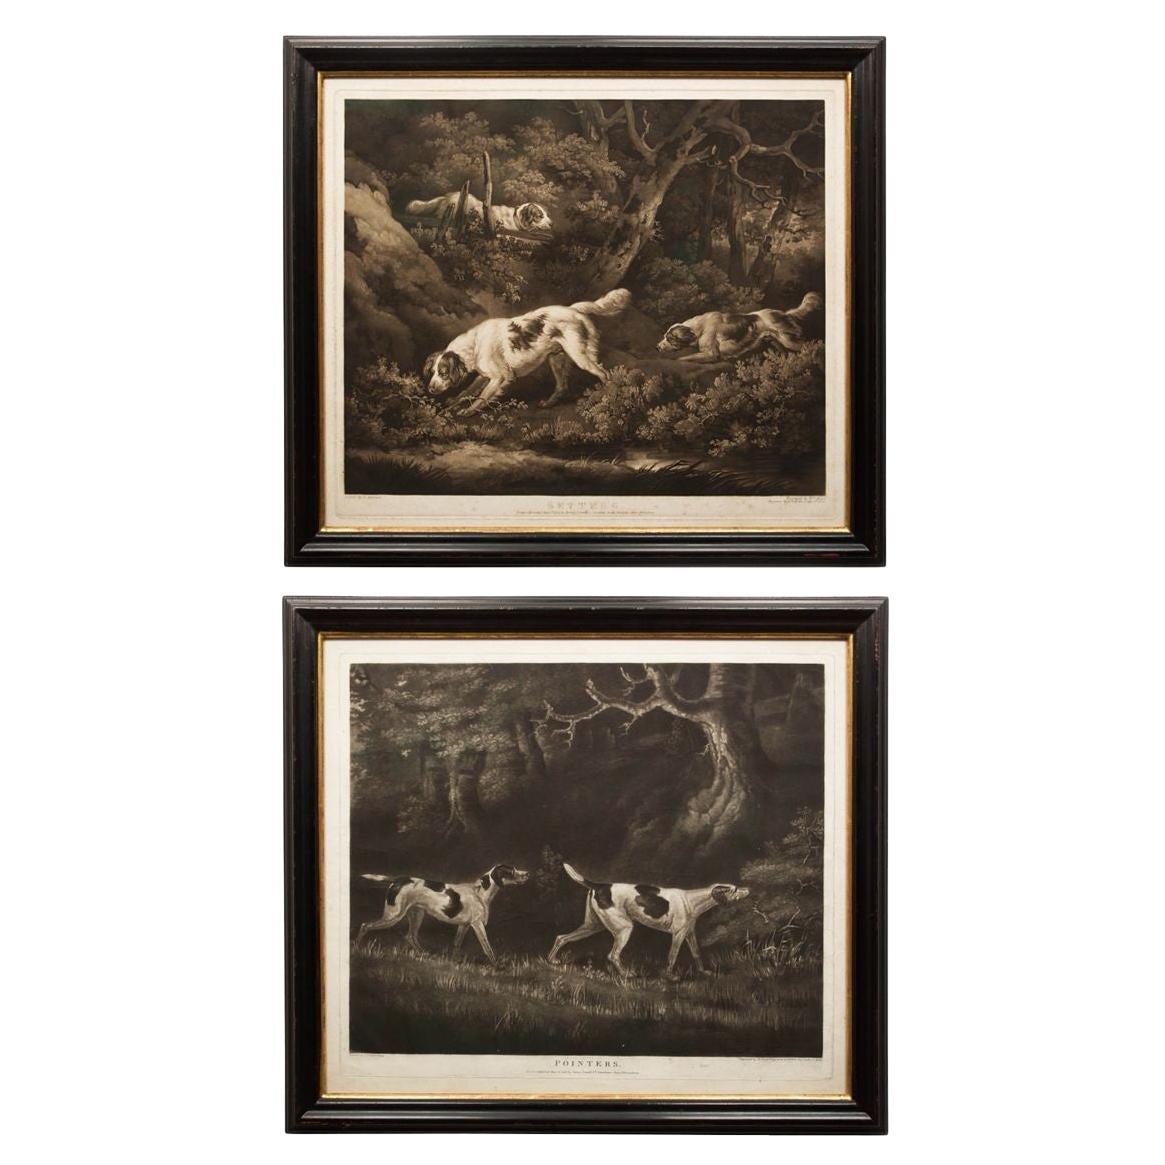 Pair of Mezzotint Engravings "Setters" & "Pointers" by William Ward, circa 1806